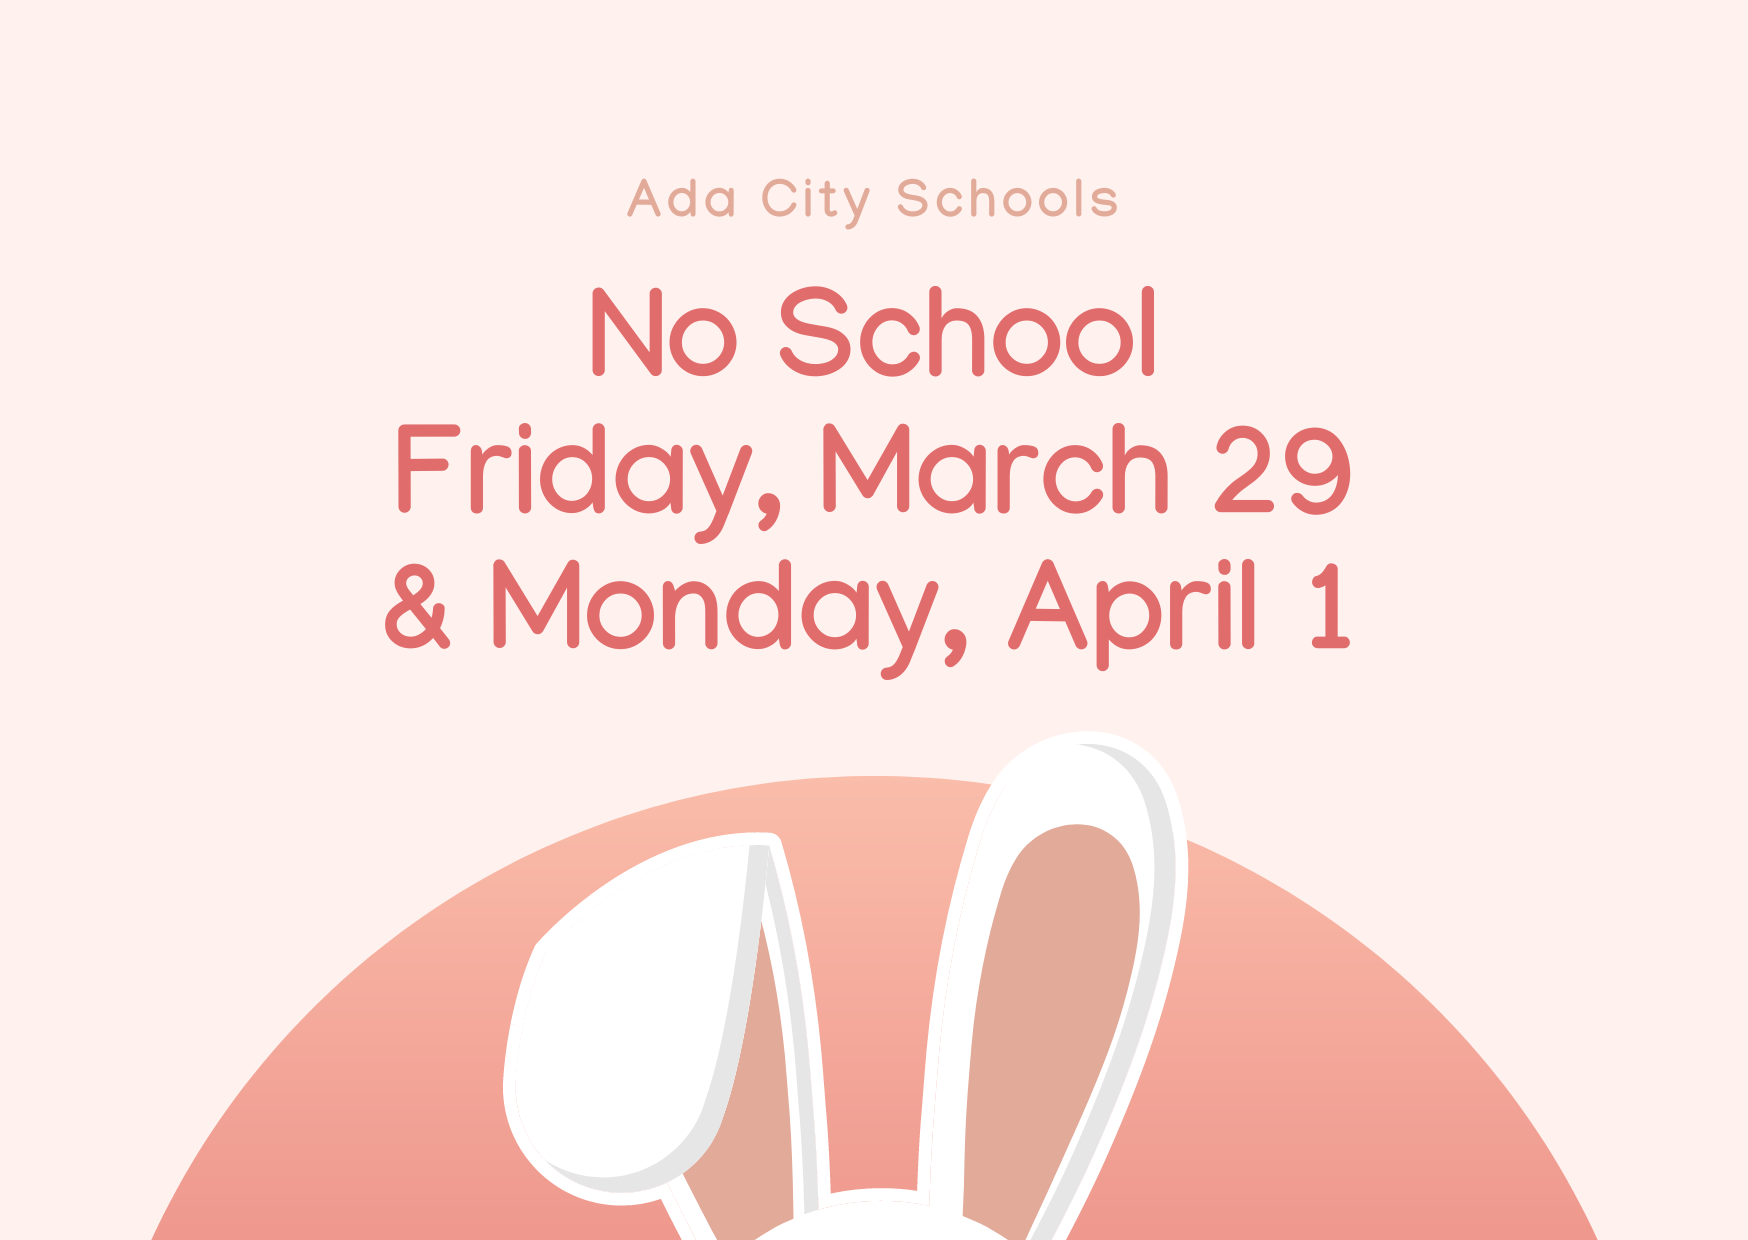 No School Friday, March 29 and Monday, April 1